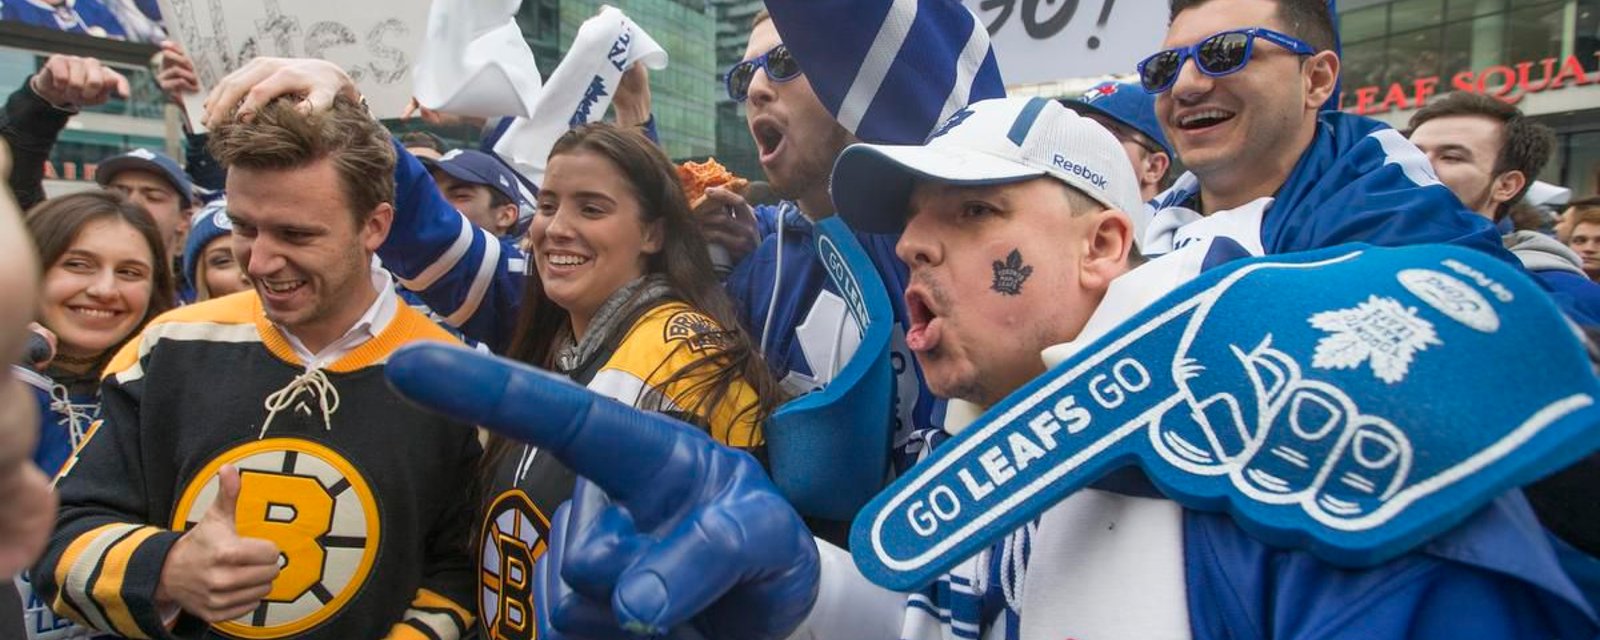 NHL fan proposes to girlfriend during Leafs-Bruins game in the BEST way possible! 